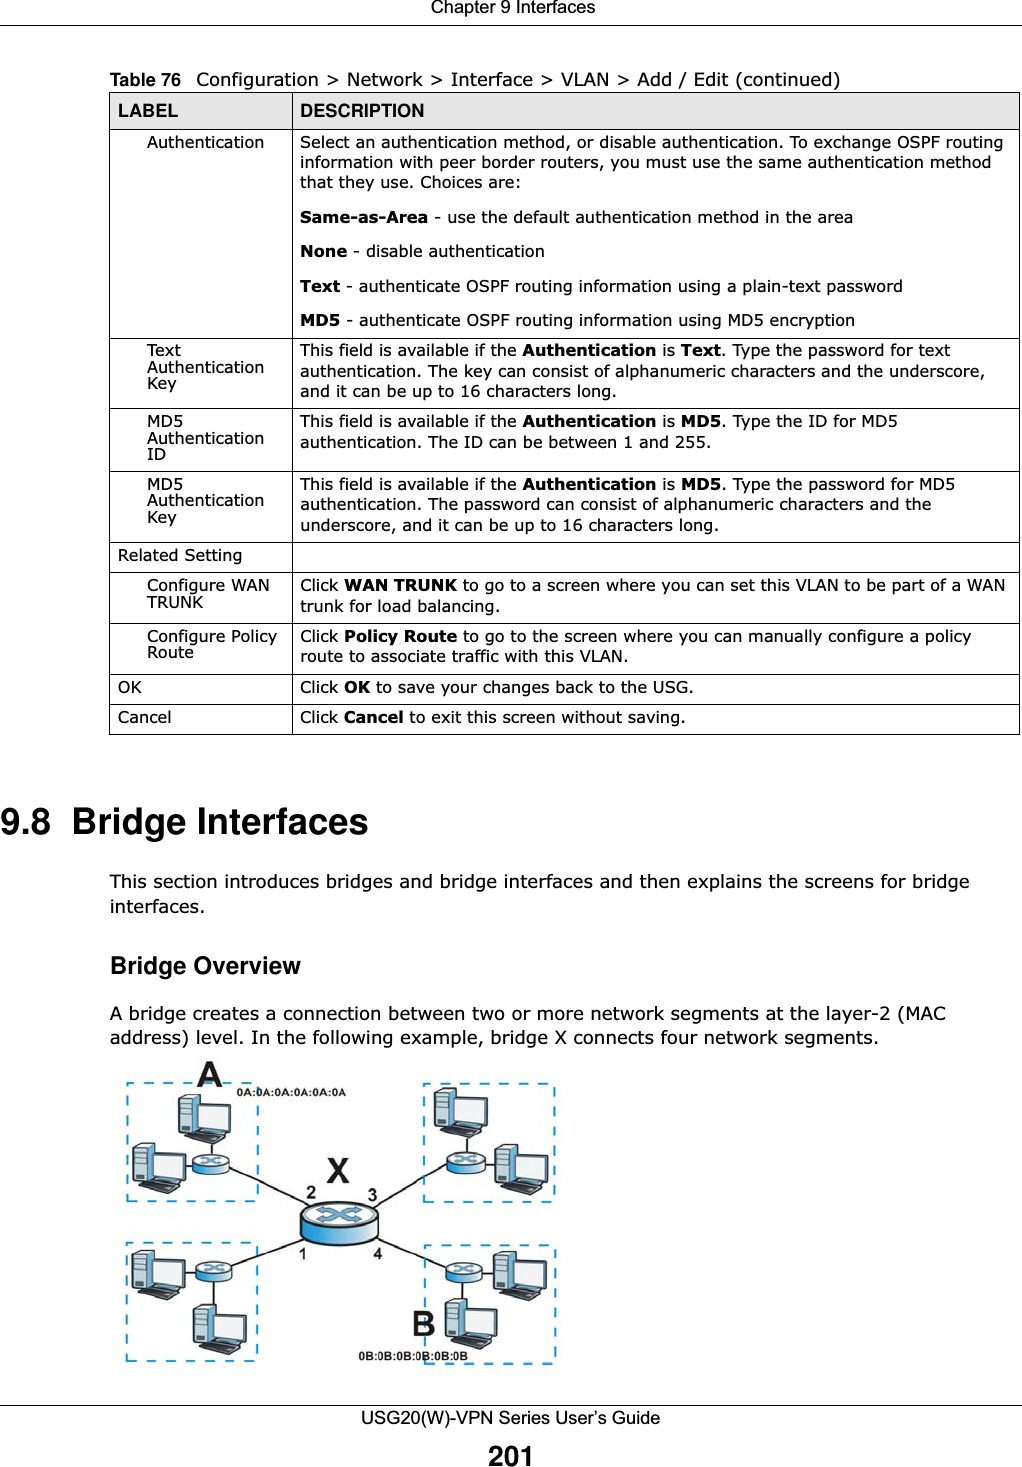  Chapter 9 InterfacesUSG20(W)-VPN Series User’s Guide2019.8  Bridge Interfaces This section introduces bridges and bridge interfaces and then explains the screens for bridge interfaces.Bridge OverviewA bridge creates a connection between two or more network segments at the layer-2 (MAC address) level. In the following example, bridge X connects four network segments.Authentication Select an authentication method, or disable authentication. To exchange OSPF routing information with peer border routers, you must use the same authentication method that they use. Choices are:Same-as-Area - use the default authentication method in the areaNone - disable authenticationText - authenticate OSPF routing information using a plain-text passwordMD5 - authenticate OSPF routing information using MD5 encryptionText Authentication KeyThis field is available if the Authentication is Text. Type the password for text authentication. The key can consist of alphanumeric characters and the underscore, and it can be up to 16 characters long.MD5 Authentication IDThis field is available if the Authentication is MD5. Type the ID for MD5 authentication. The ID can be between 1 and 255.MD5 Authentication KeyThis field is available if the Authentication is MD5. Type the password for MD5 authentication. The password can consist of alphanumeric characters and the underscore, and it can be up to 16 characters long.Related SettingConfigure WAN TRUNK  Click WAN TRUNK to go to a screen where you can set this VLAN to be part of a WAN trunk for load balancing.Configure Policy Route Click Policy Route to go to the screen where you can manually configure a policy route to associate traffic with this VLAN.OK Click OK to save your changes back to the USG.Cancel Click Cancel to exit this screen without saving.Table 76   Configuration &gt; Network &gt; Interface &gt; VLAN &gt; Add / Edit (continued)LABEL DESCRIPTION